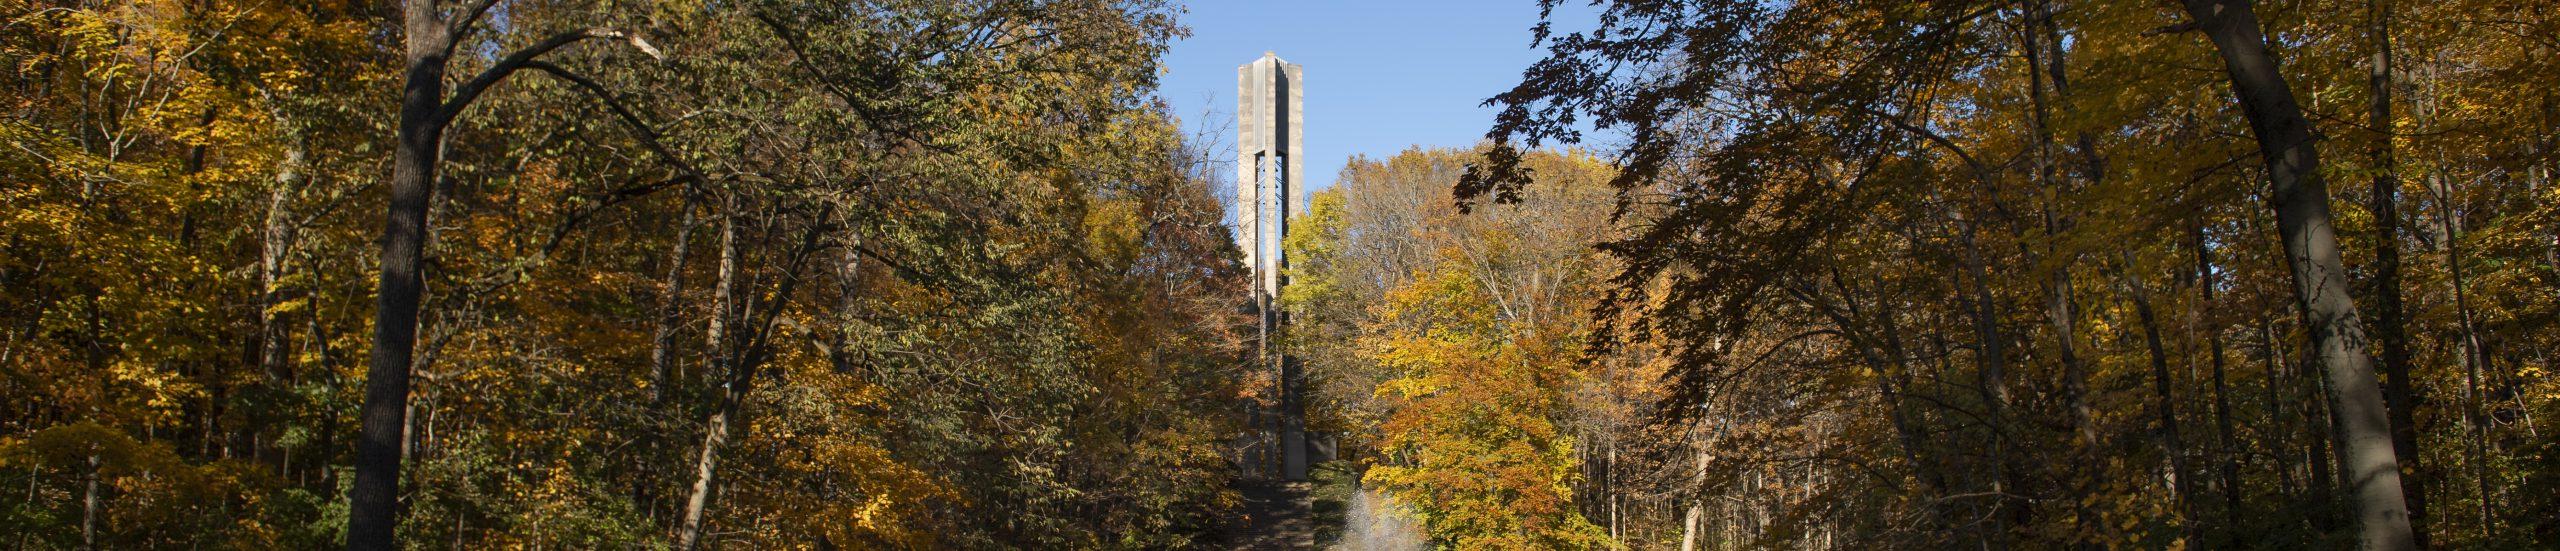 A photo of the Carillon in the distance, framed by trees.